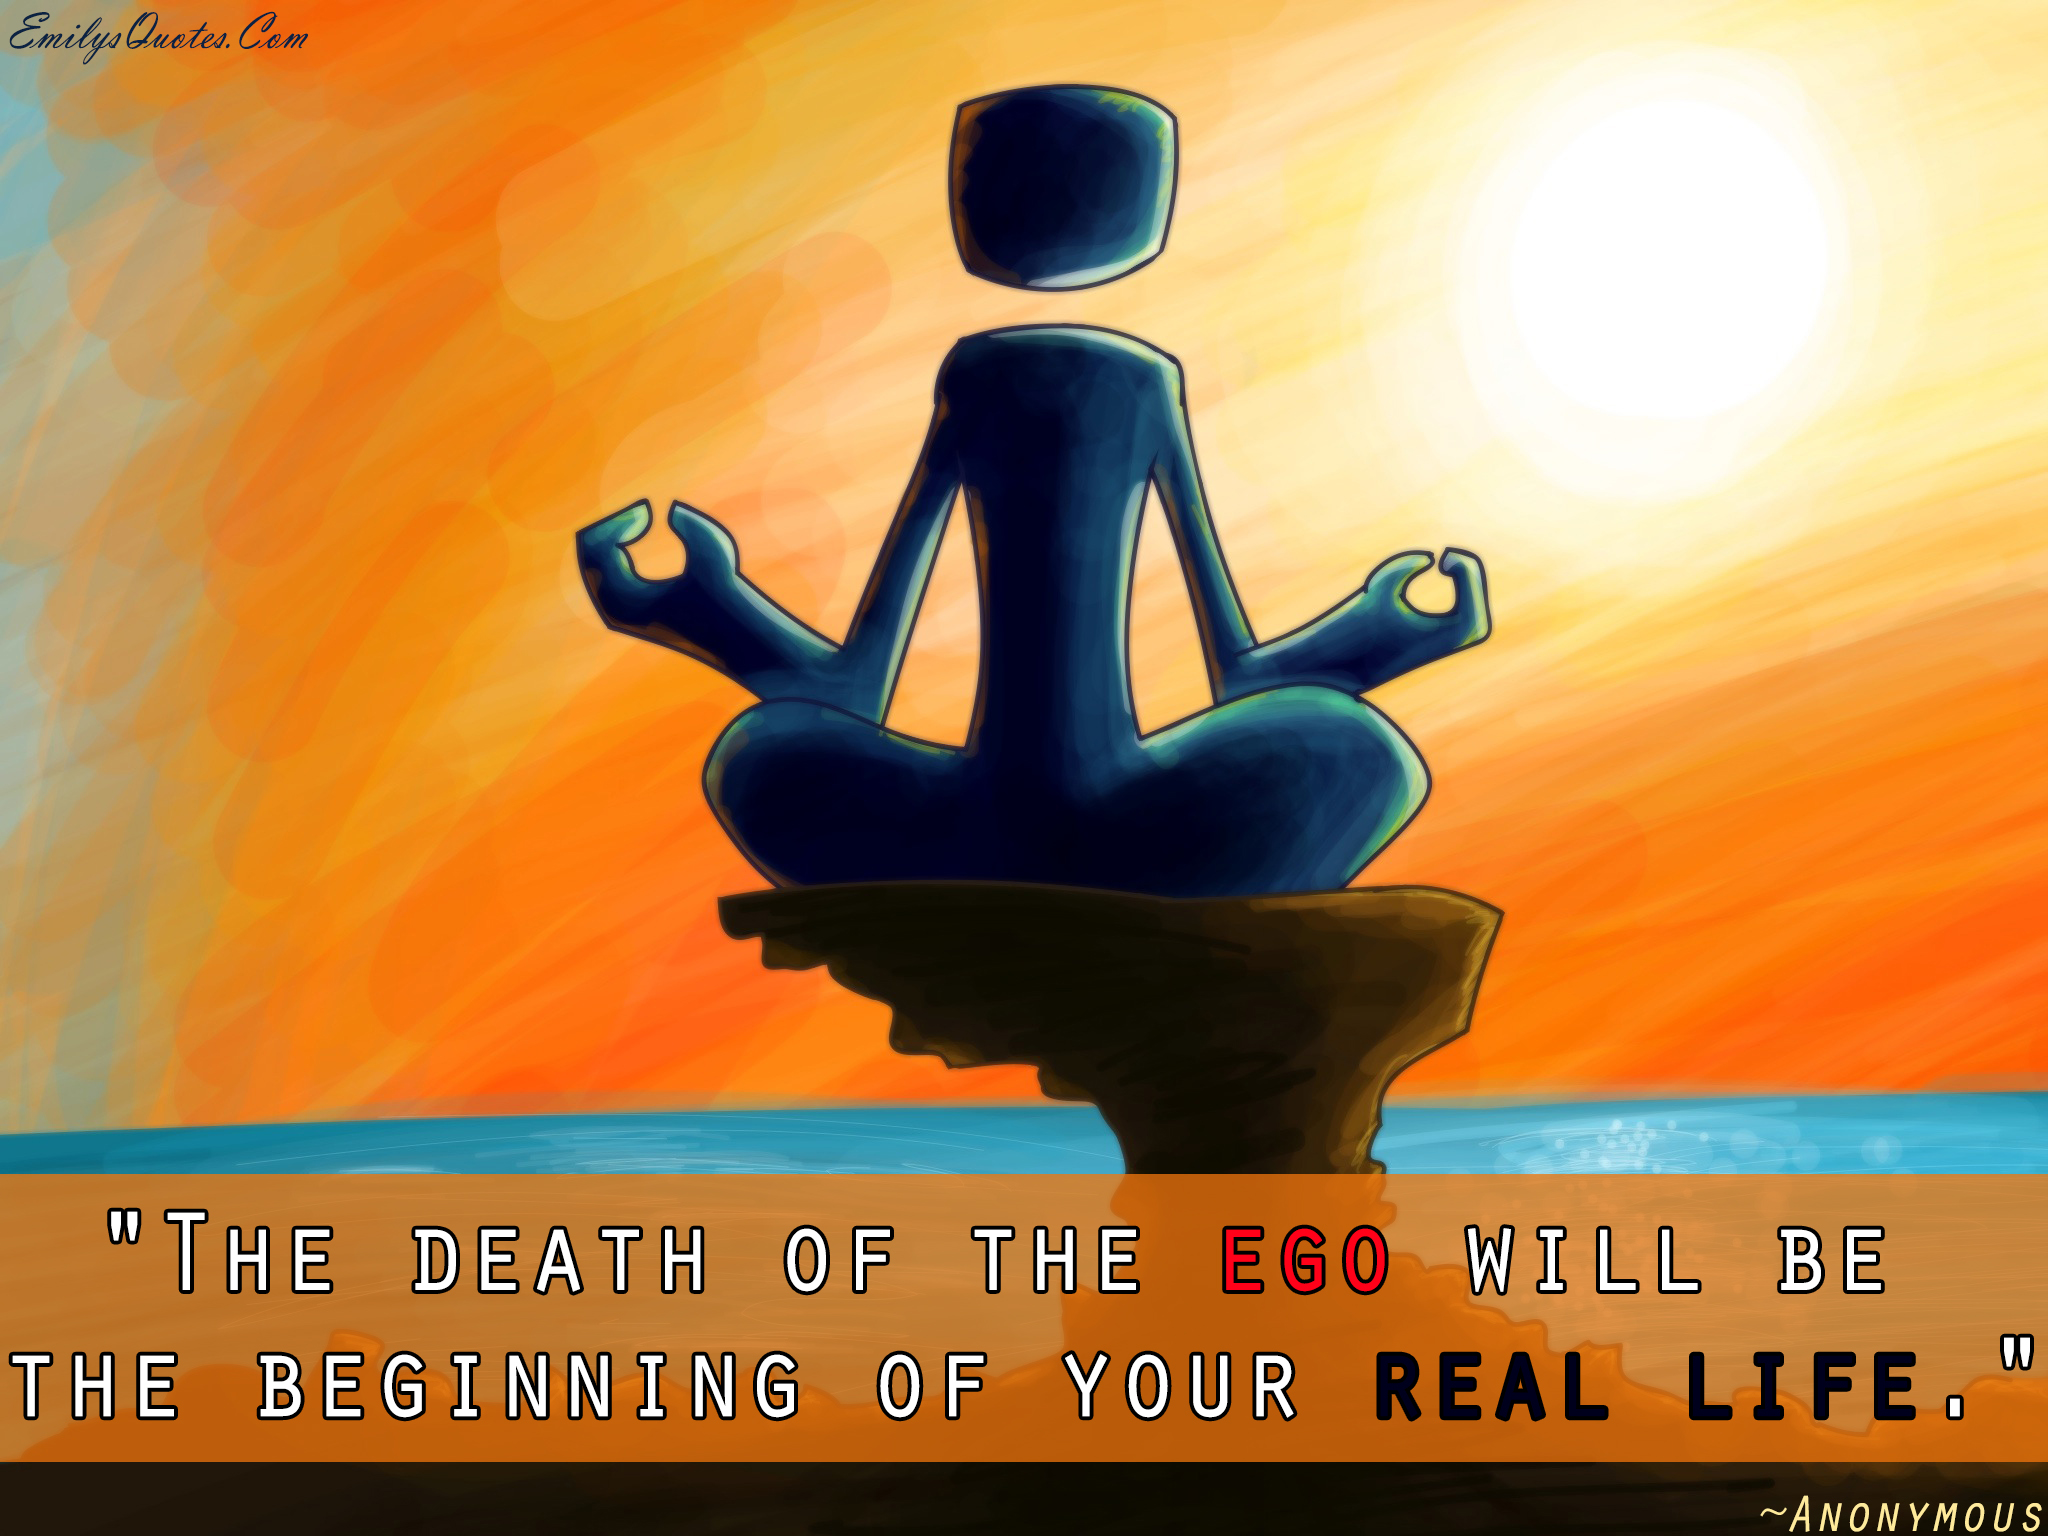 The death of the ego will be the beginning of your real life